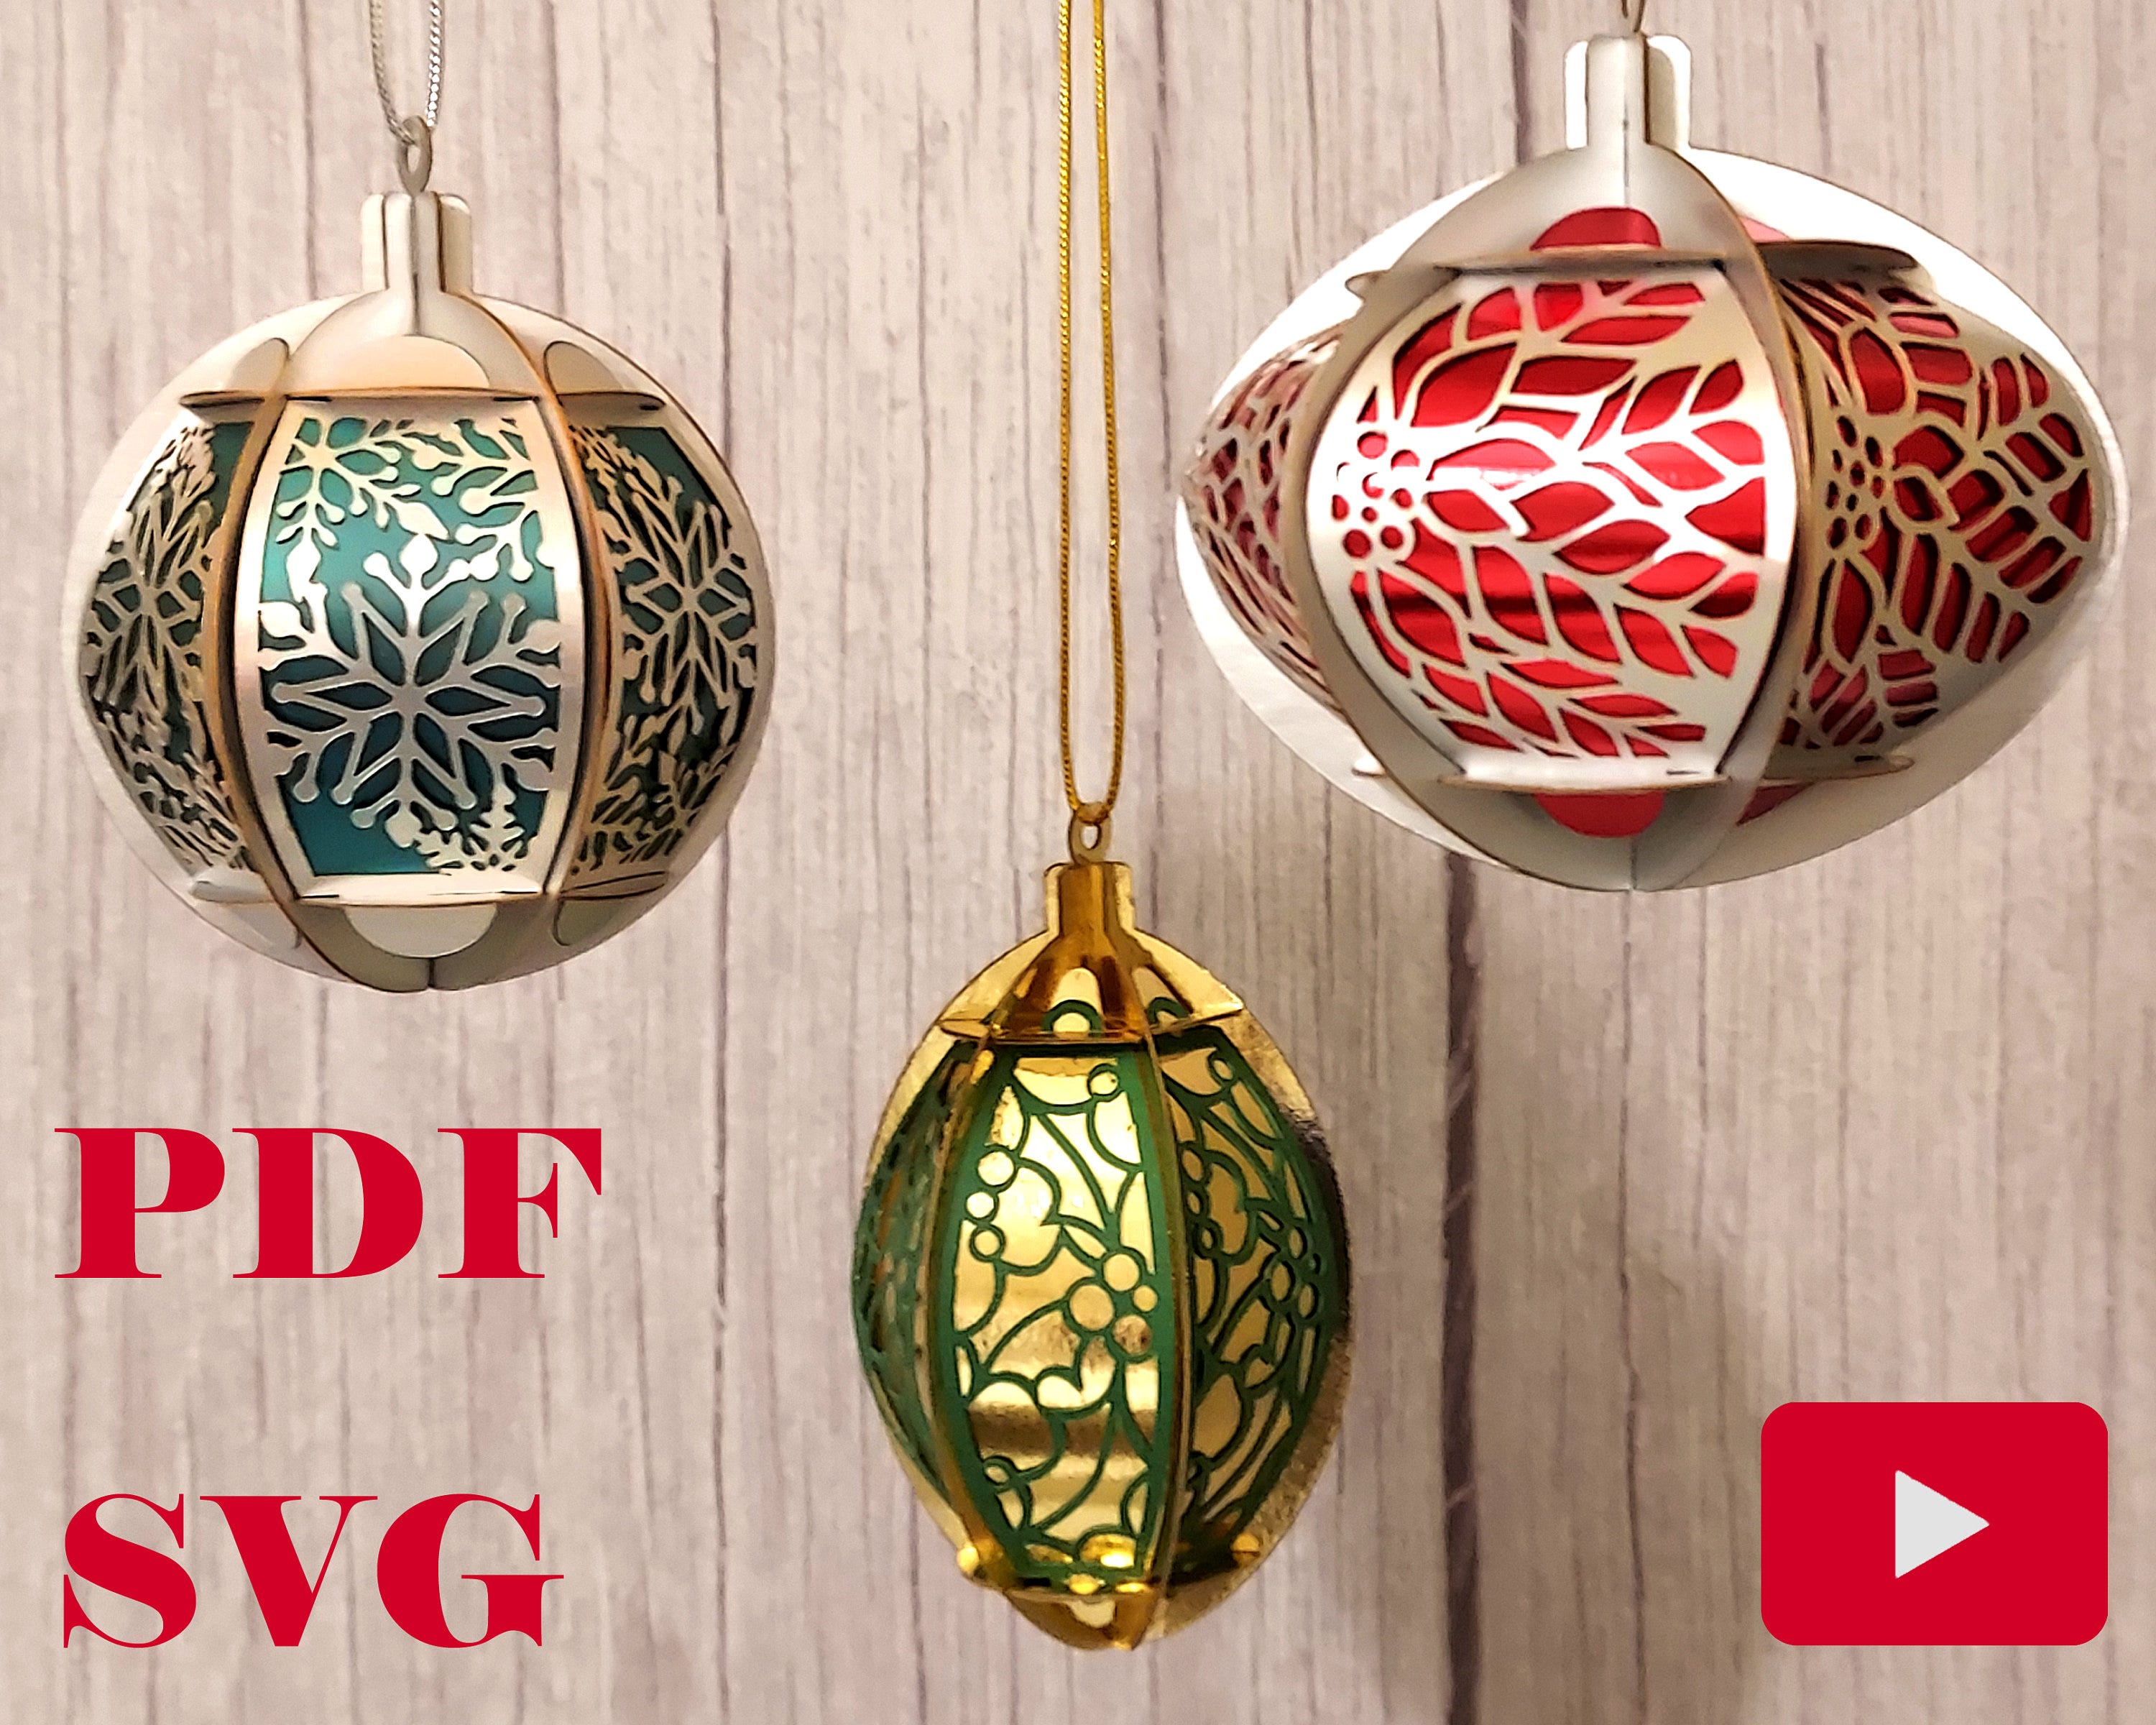 DIY Easy 3D Christmas Ornaments no glue template PDF and SVG file for instant download